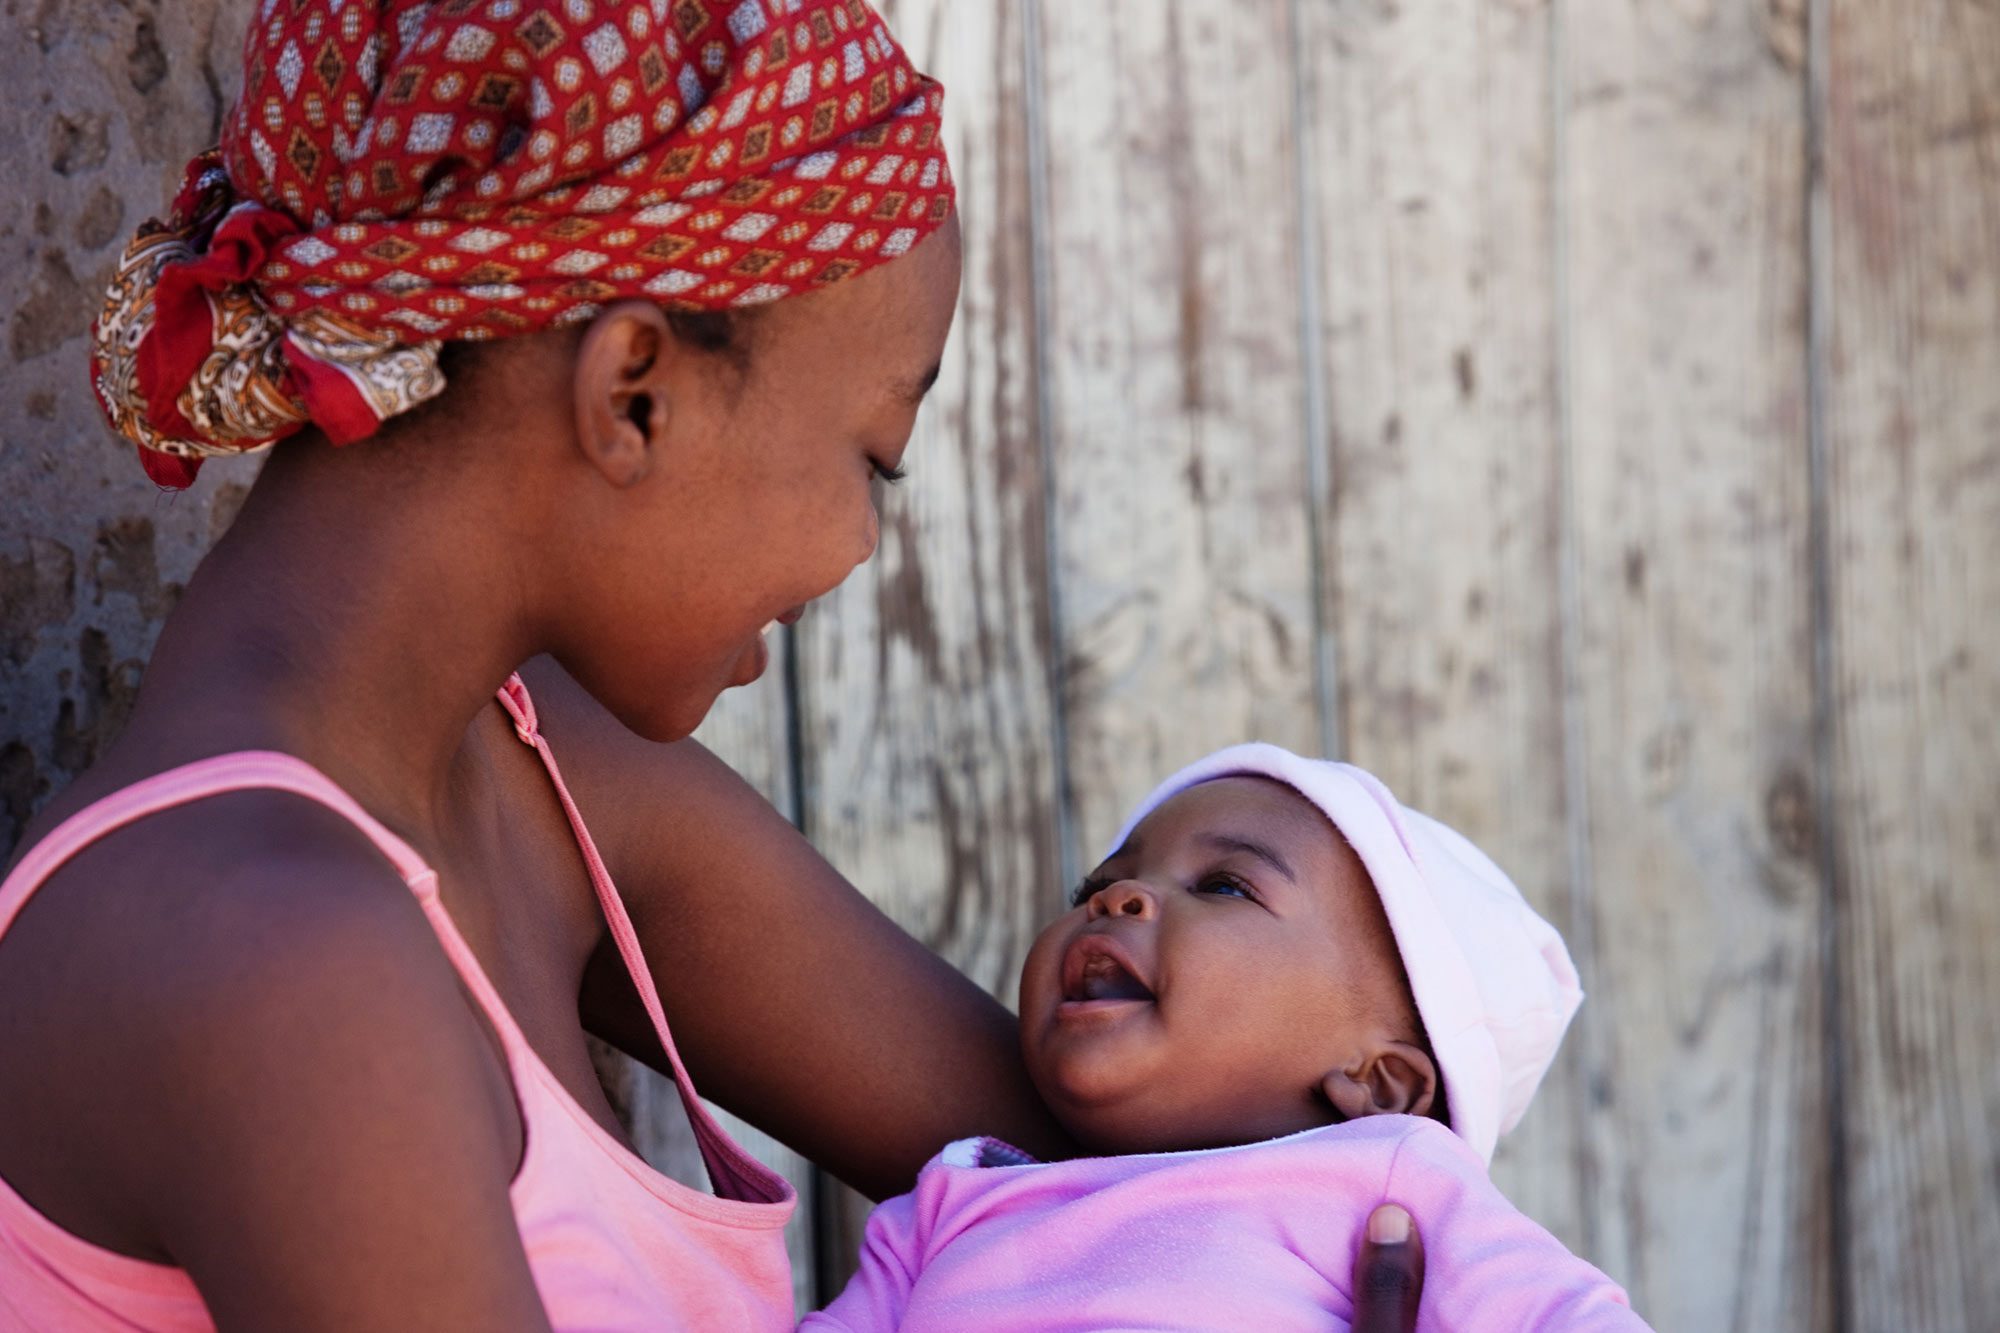 Challenge: Reduce maternal and injury mortality rates in Africa